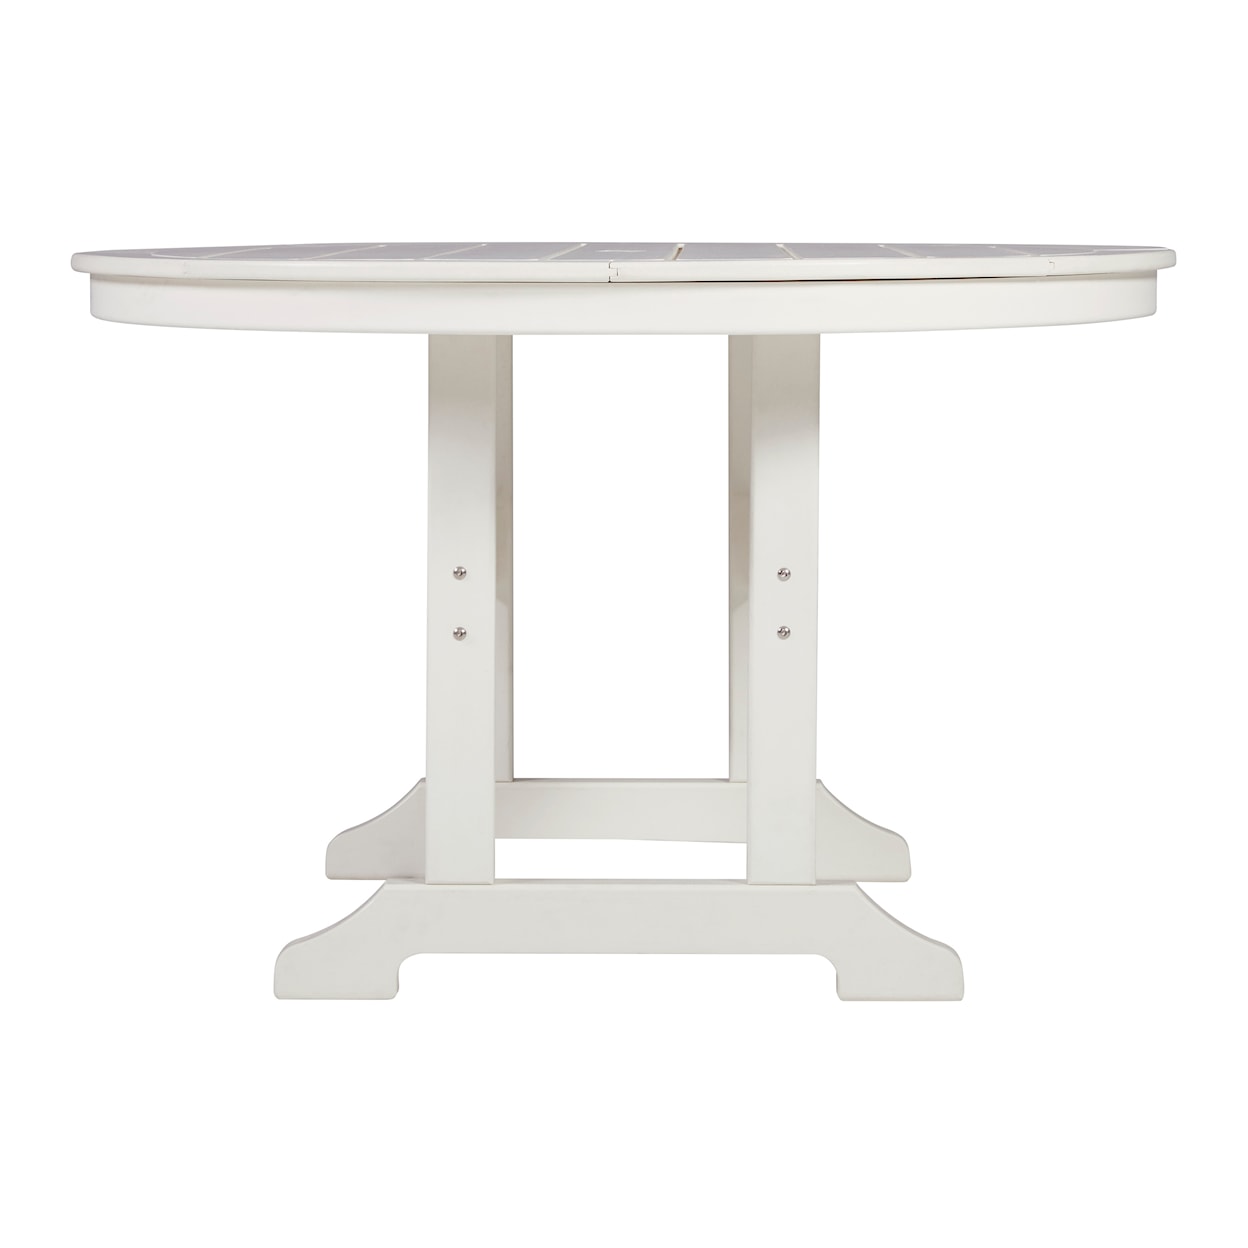 Signature Design by Ashley Crescent Luxe Outdoor Dining Table